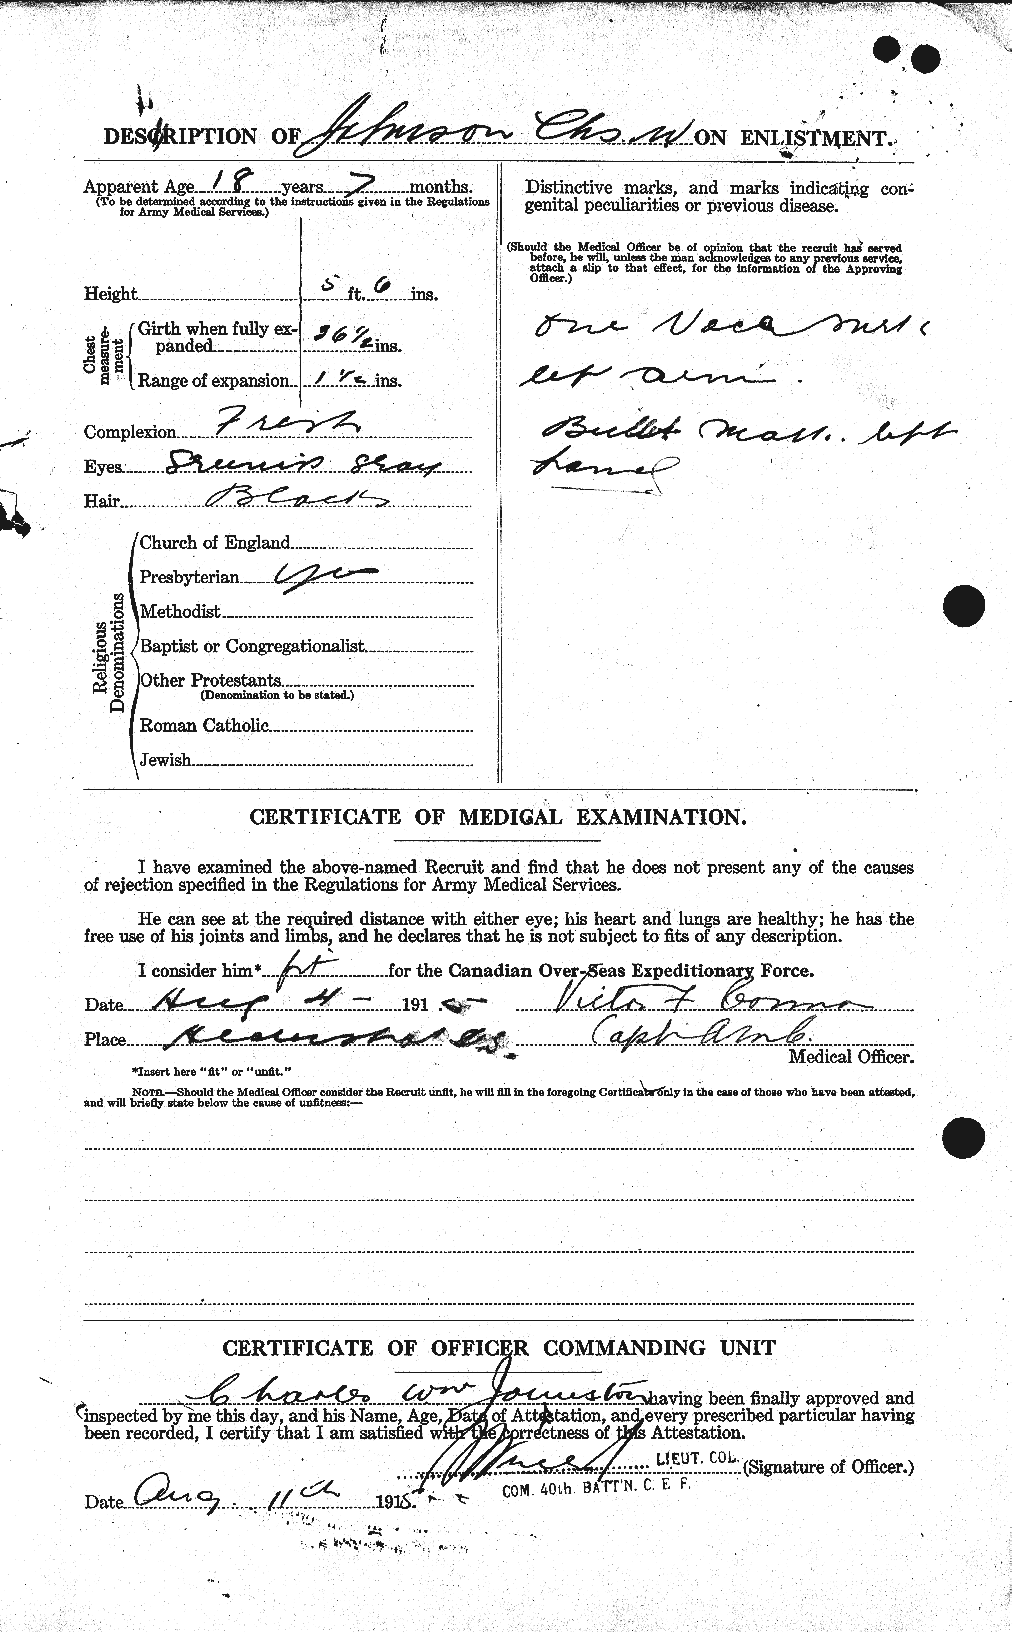 Personnel Records of the First World War - CEF 423123b